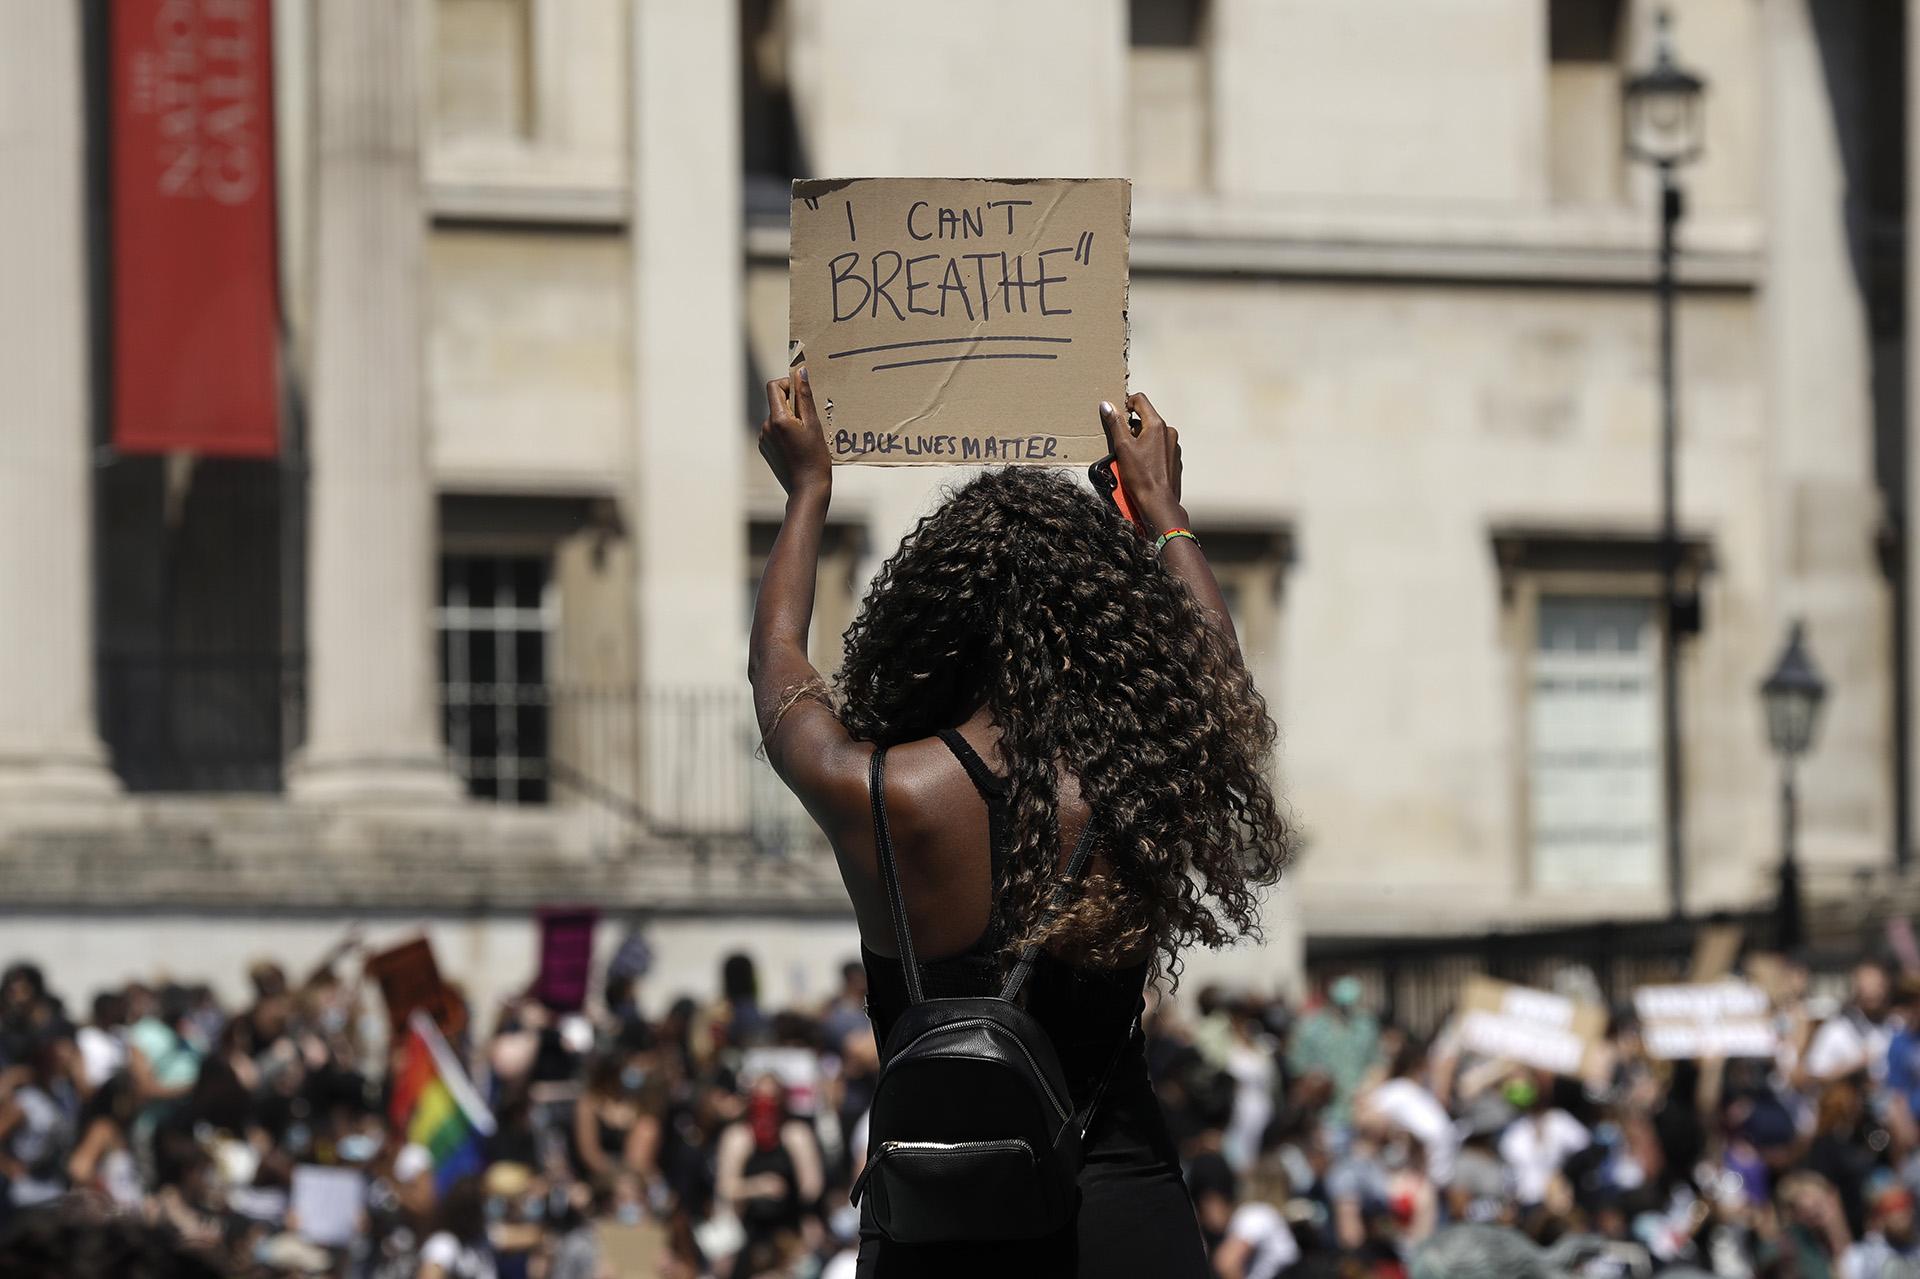 A woman holds up a banner as people gather in Trafalgar Square in central London on Sunday, May 31, 2020 to protest against the recent killing of George Floyd by police officers in Minneapolis that has led to protests across the U.S. (AP Photo / Matt Dunham)